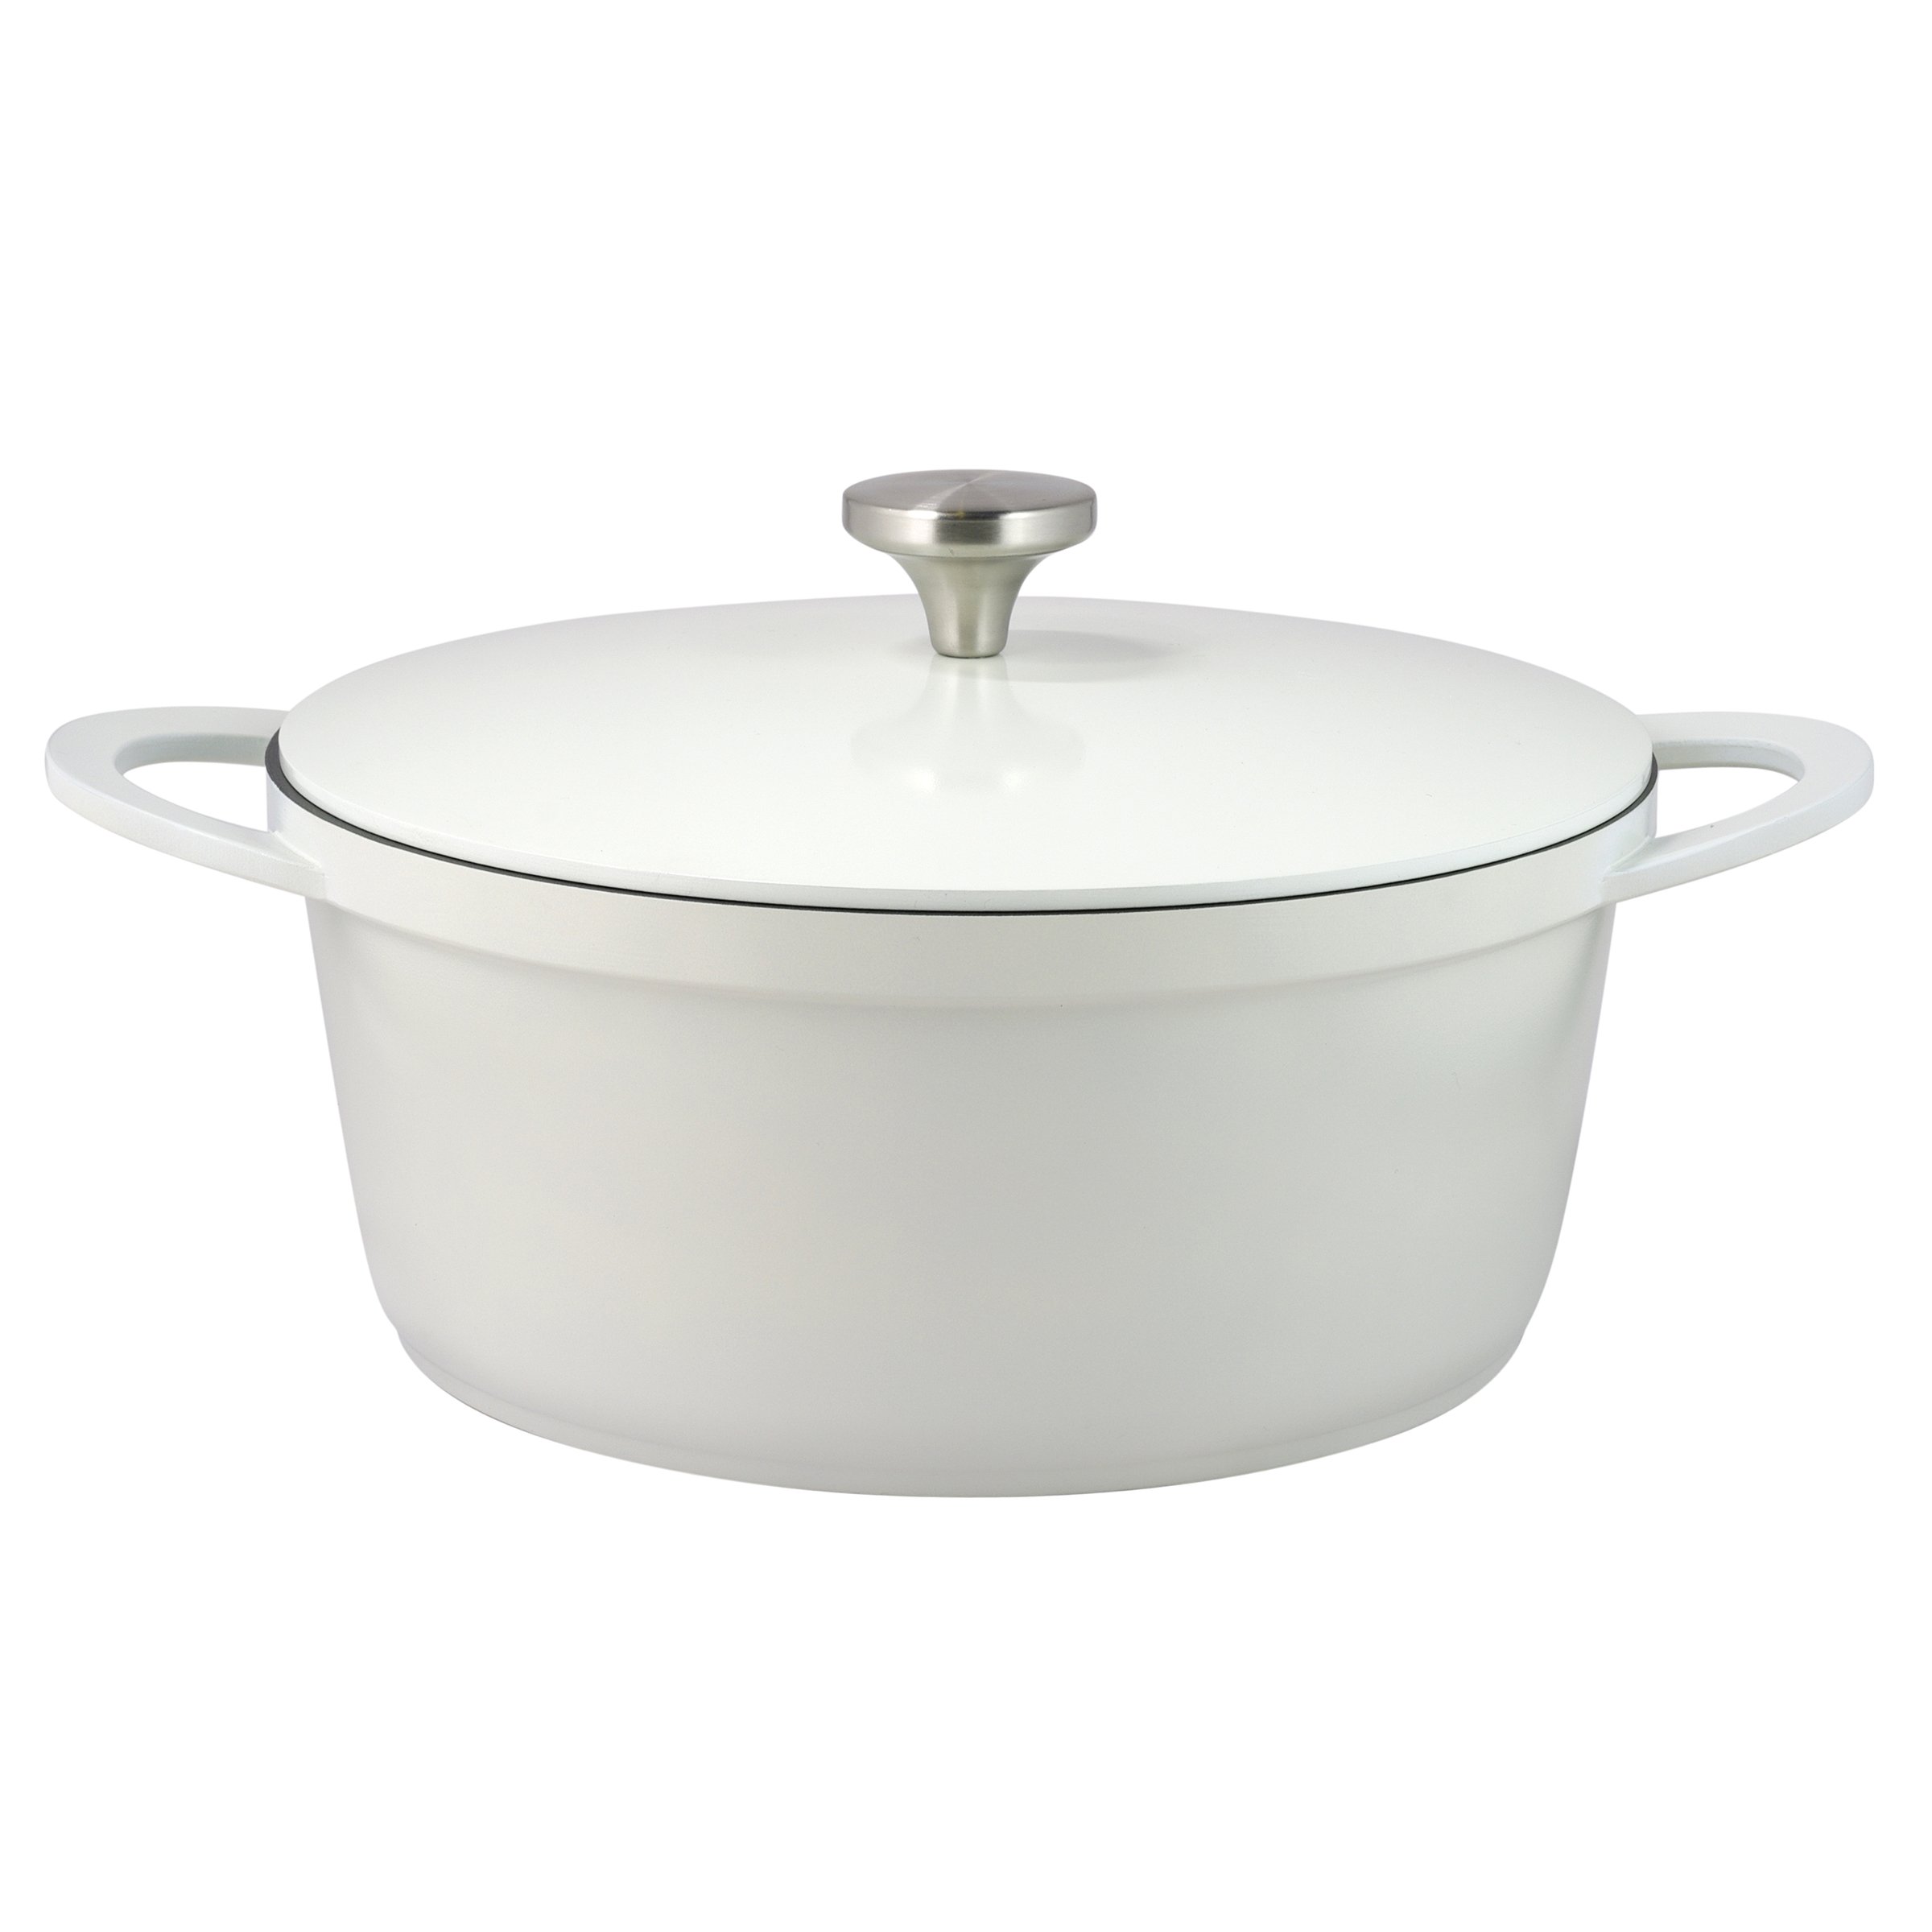 Sonoma White Cast Aluminum Dutch Oven with Fry Basket